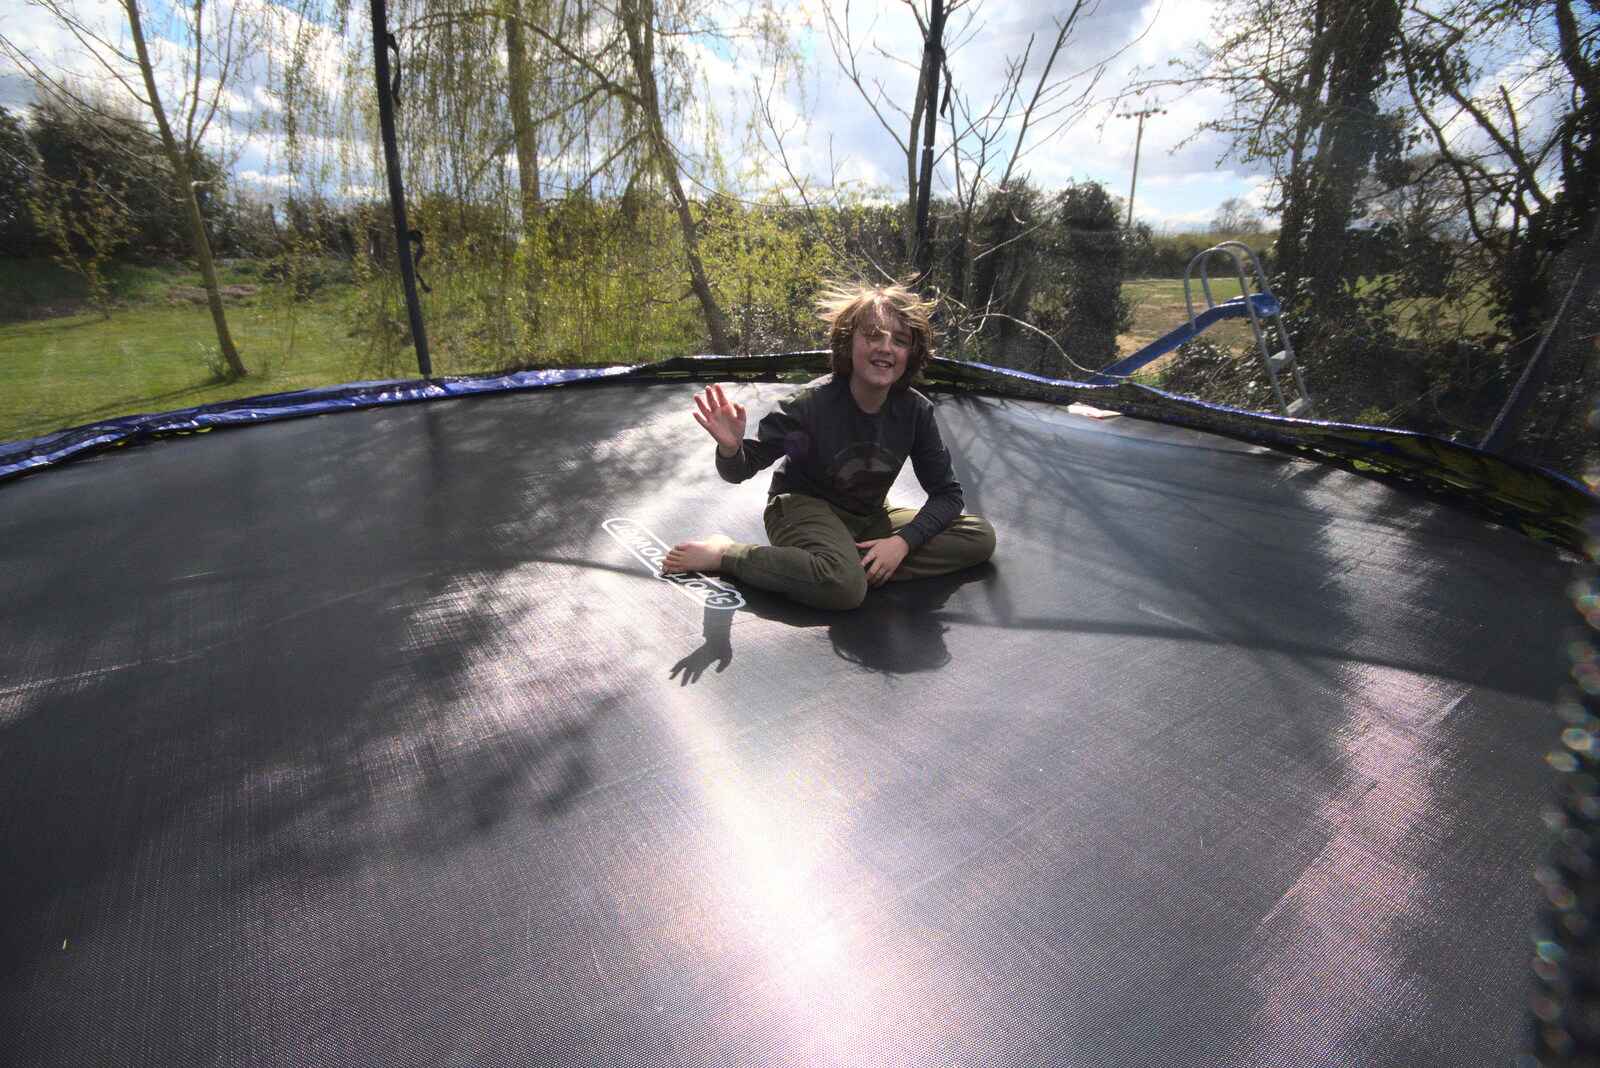 Fred waves from Roadworks and Harry's Trampoline, Brome, Suffolk - 6th April 2021